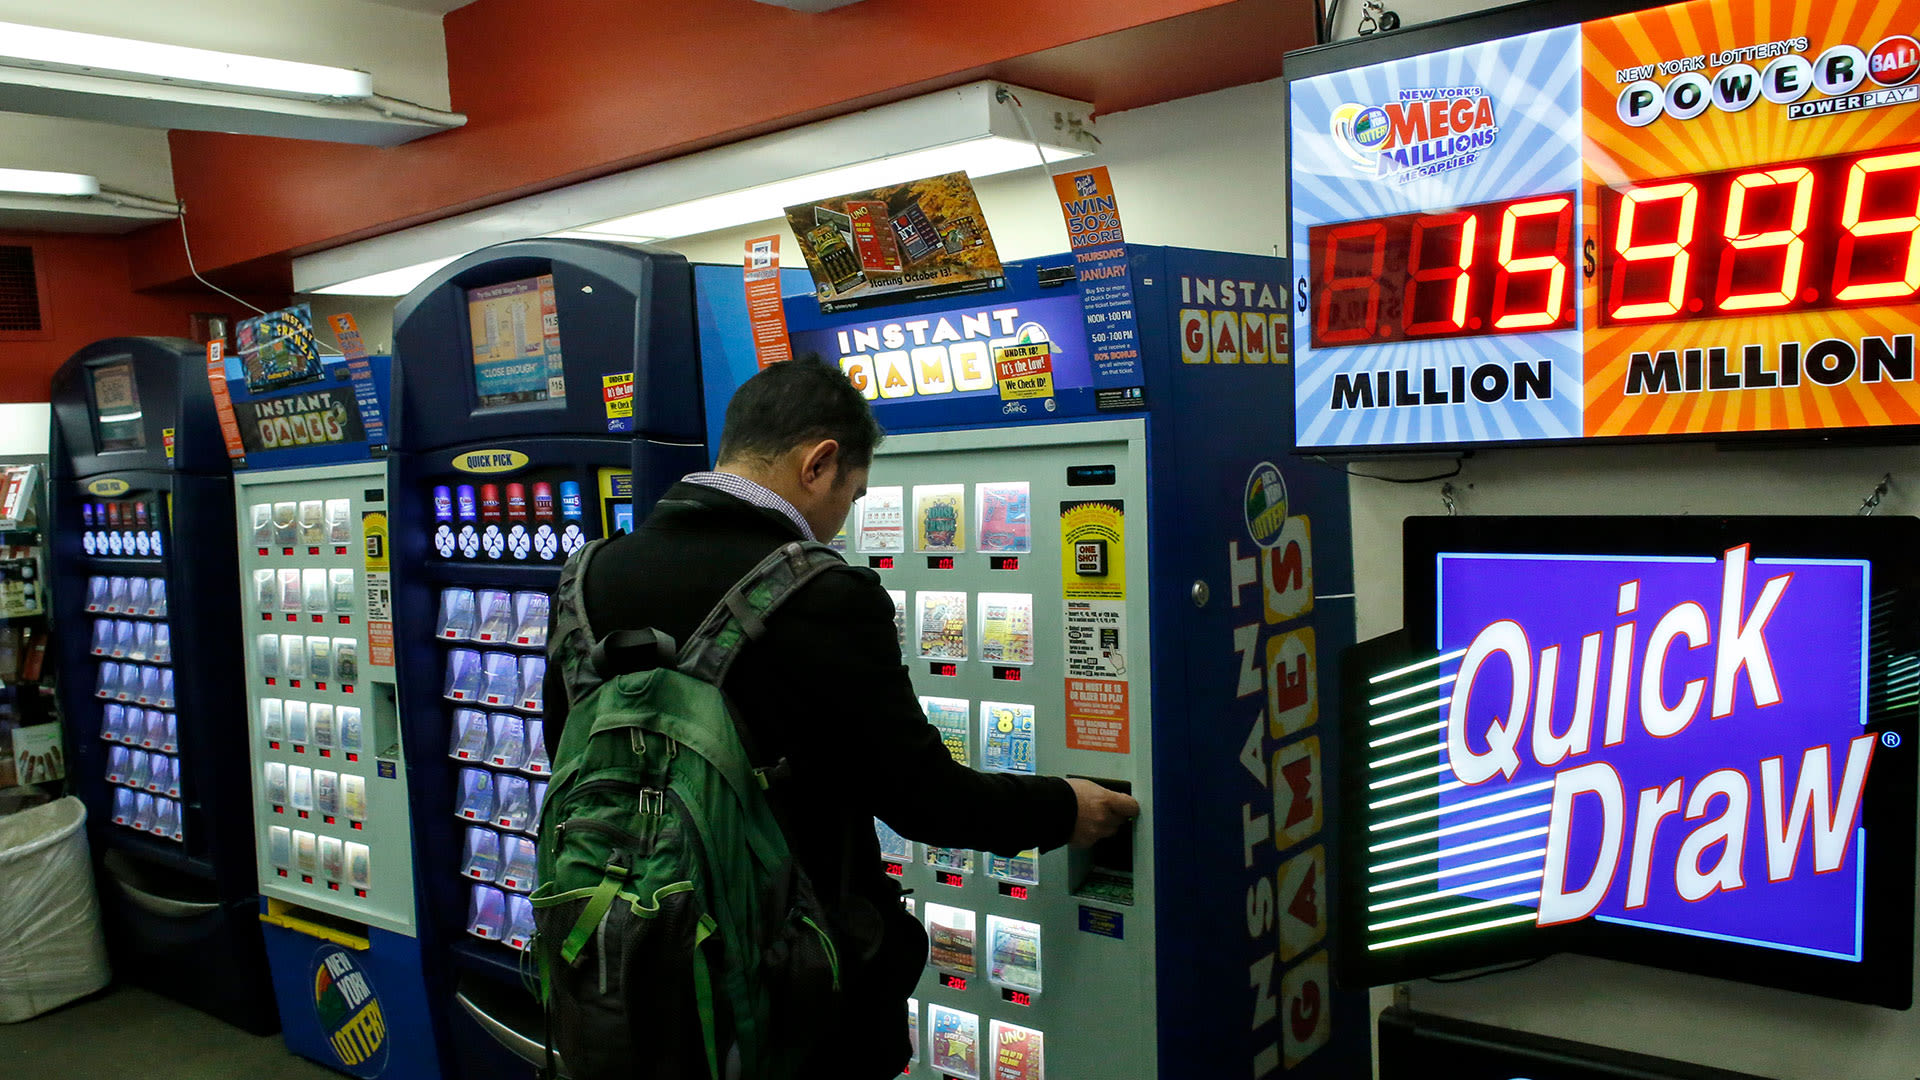 Lottery warning to check Powerball tickets as $500,000 jackpot remains unclaimed